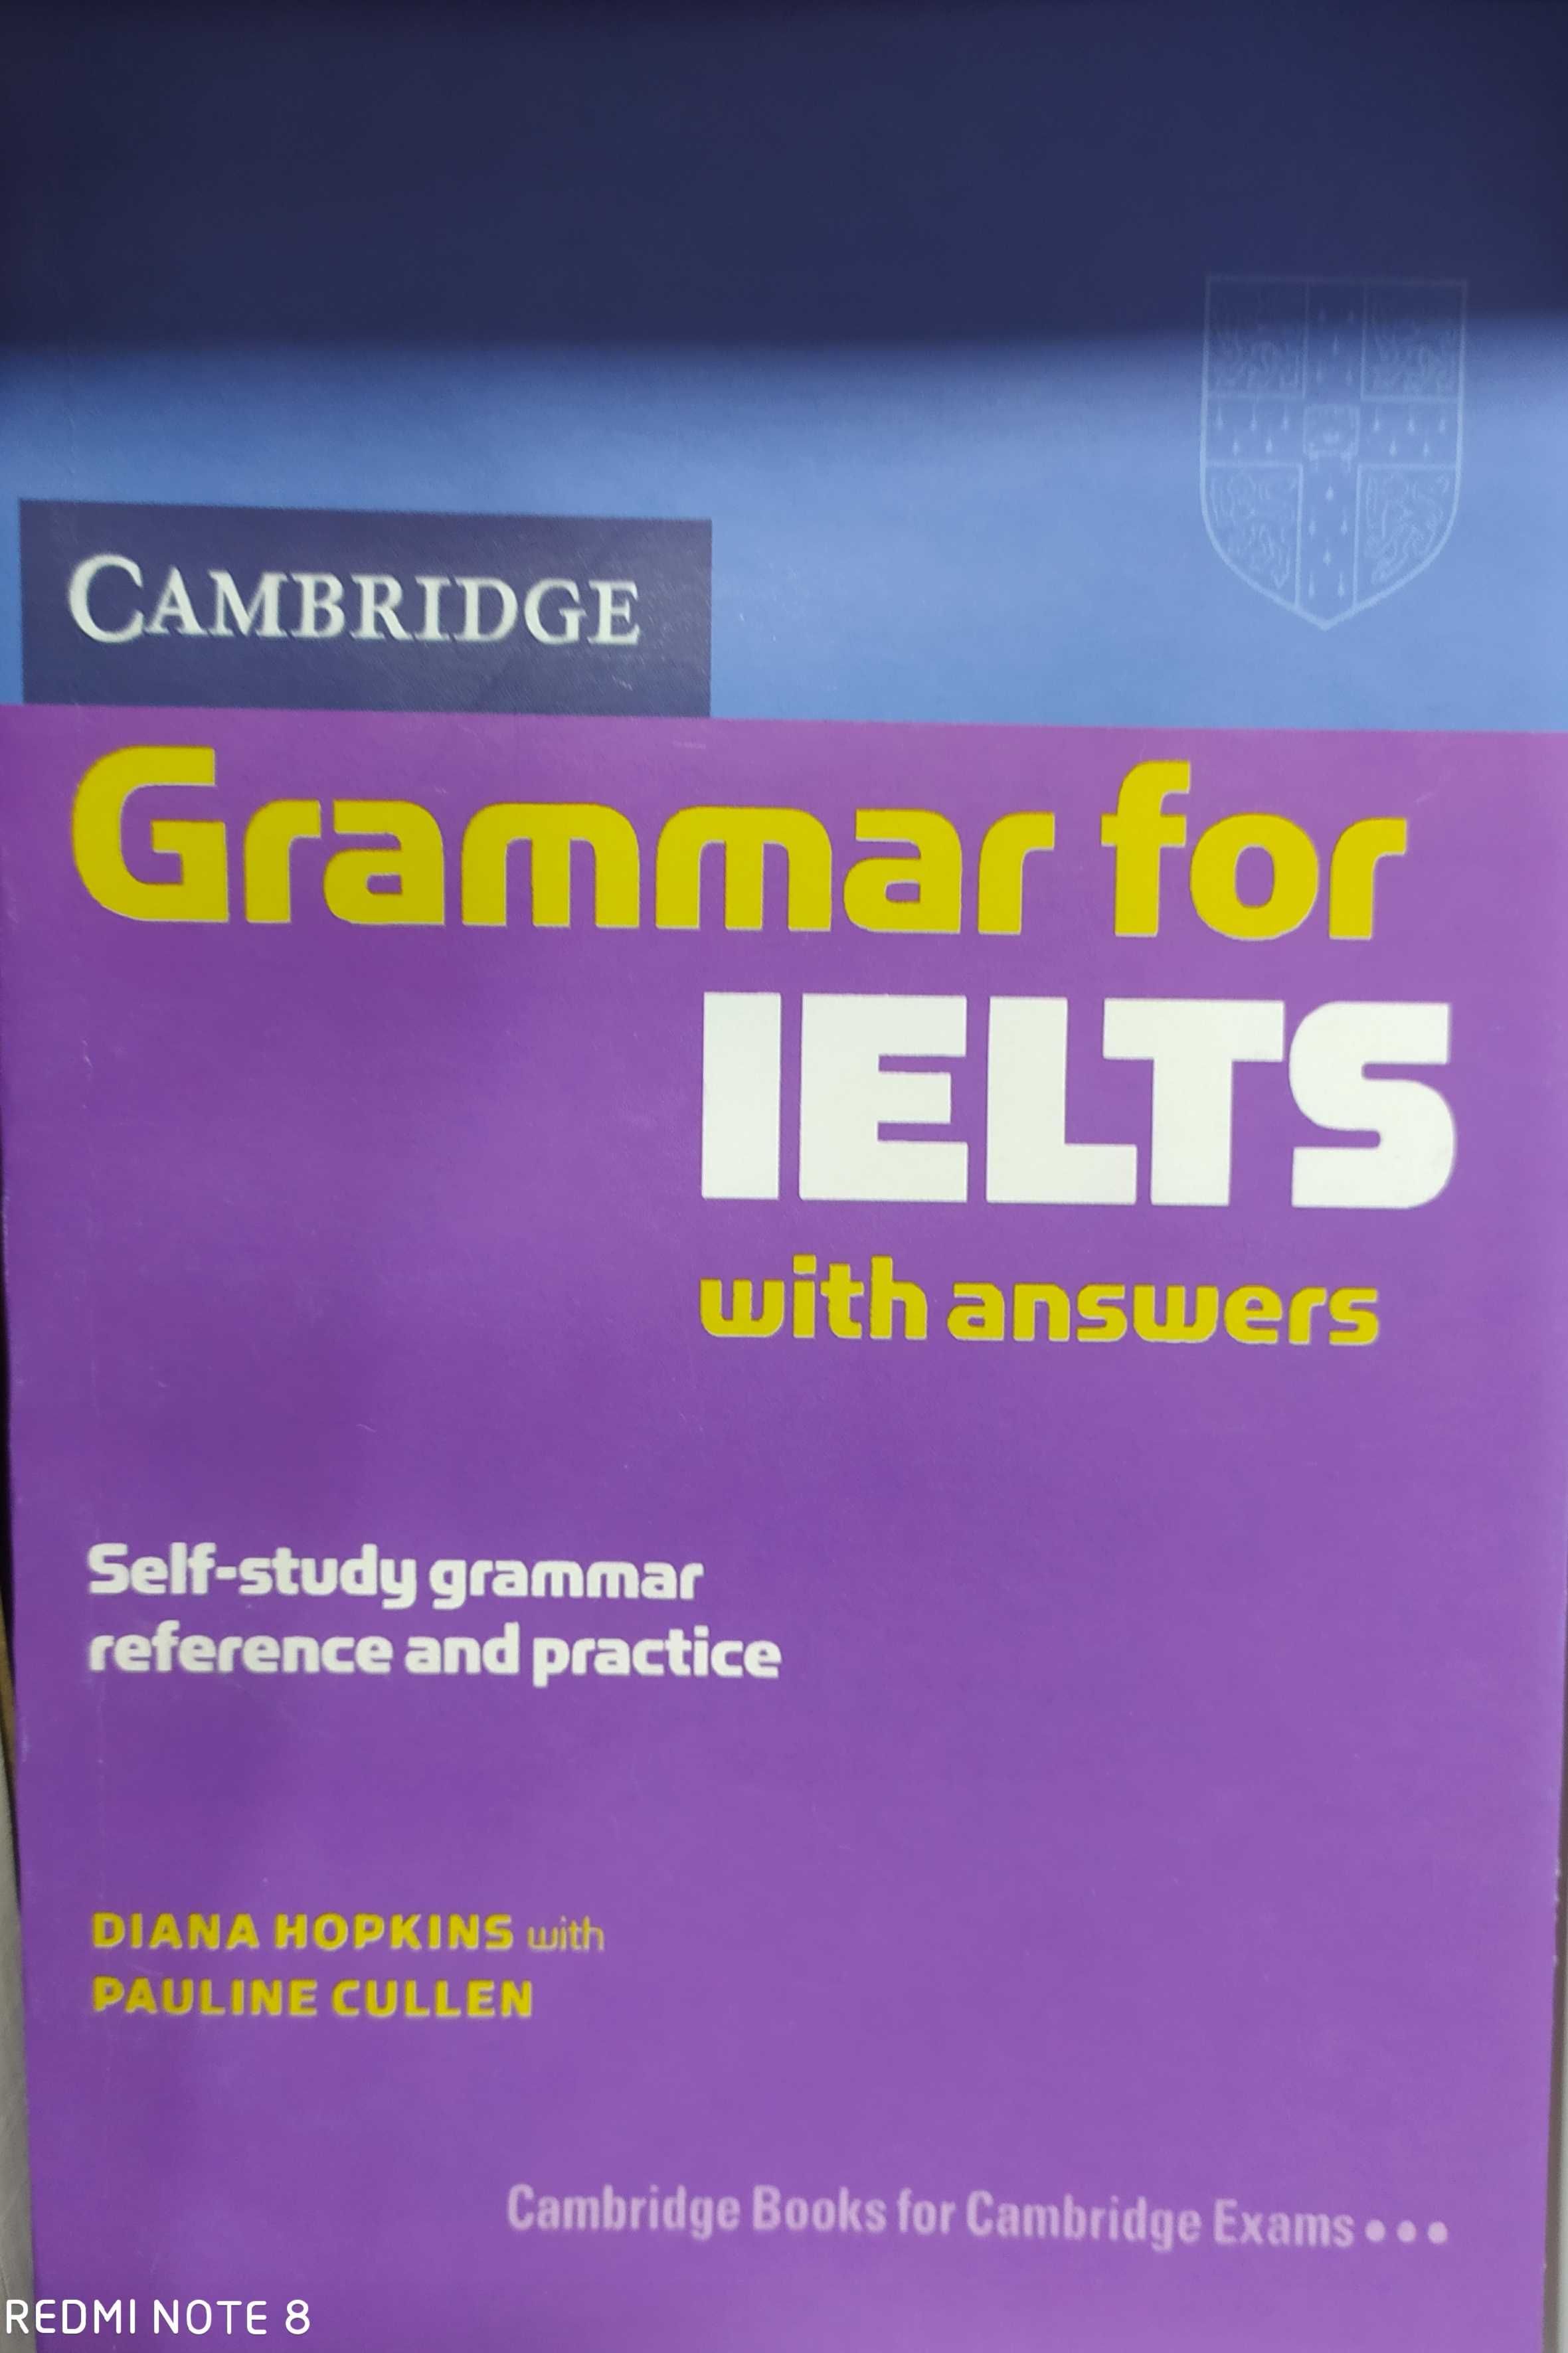 Lessons for Ielts reading speaking writing listening Grammar for Ielts